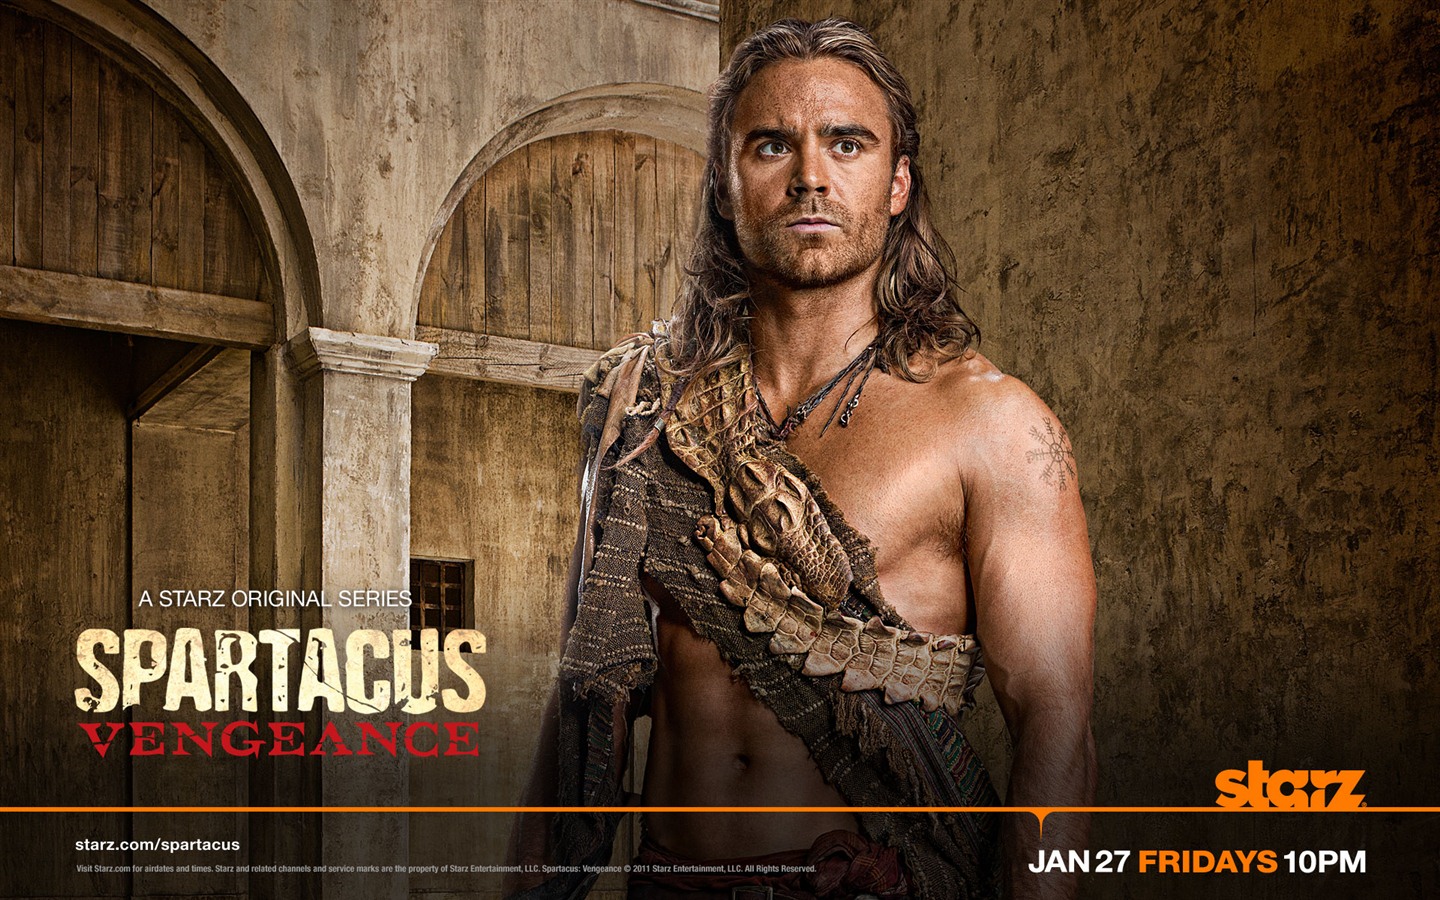 Spartacus: Vengeance HD wallpapers #14 - 1440x900